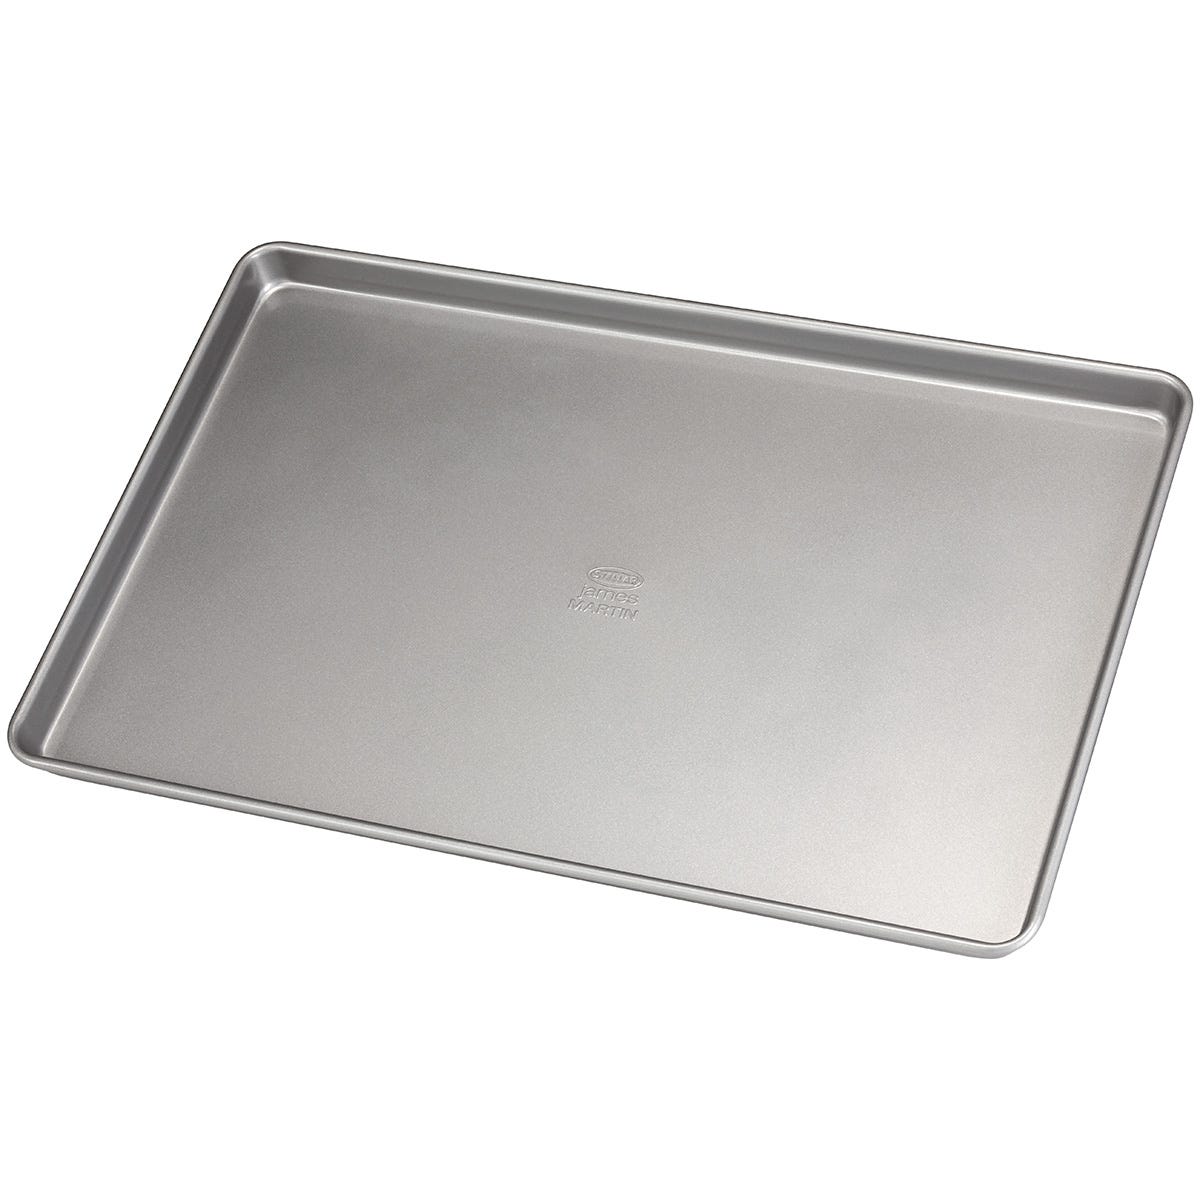 Stellar James Martin Bakers Collection Non-Stick Baking Tray - Large